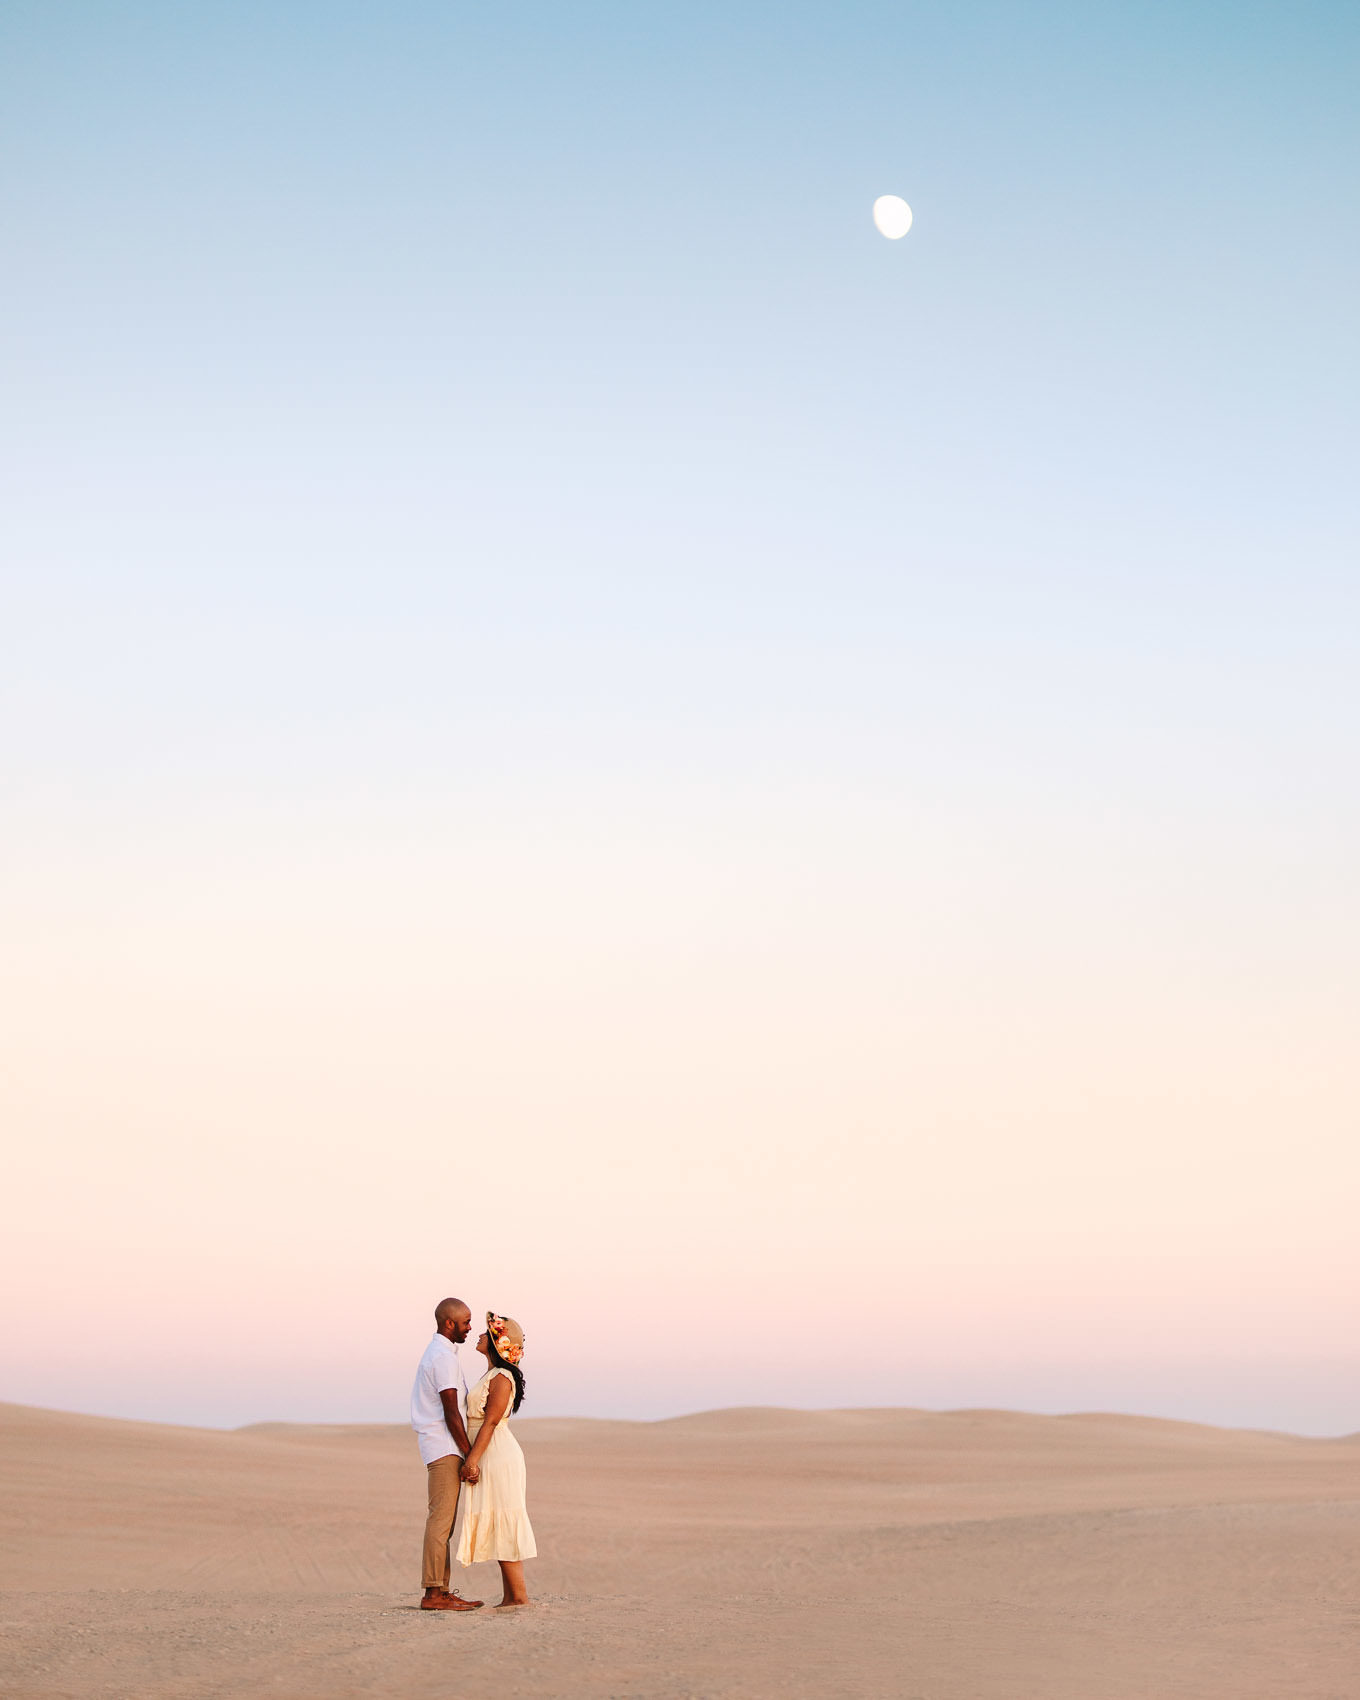 Beautiful sand dune engagement | California Sand Dunes engagement session | Colorful Palm Springs wedding photography | #palmspringsphotographer #sanddunes #engagementsession #southerncalifornia  Source: Mary Costa Photography | Los Angeles